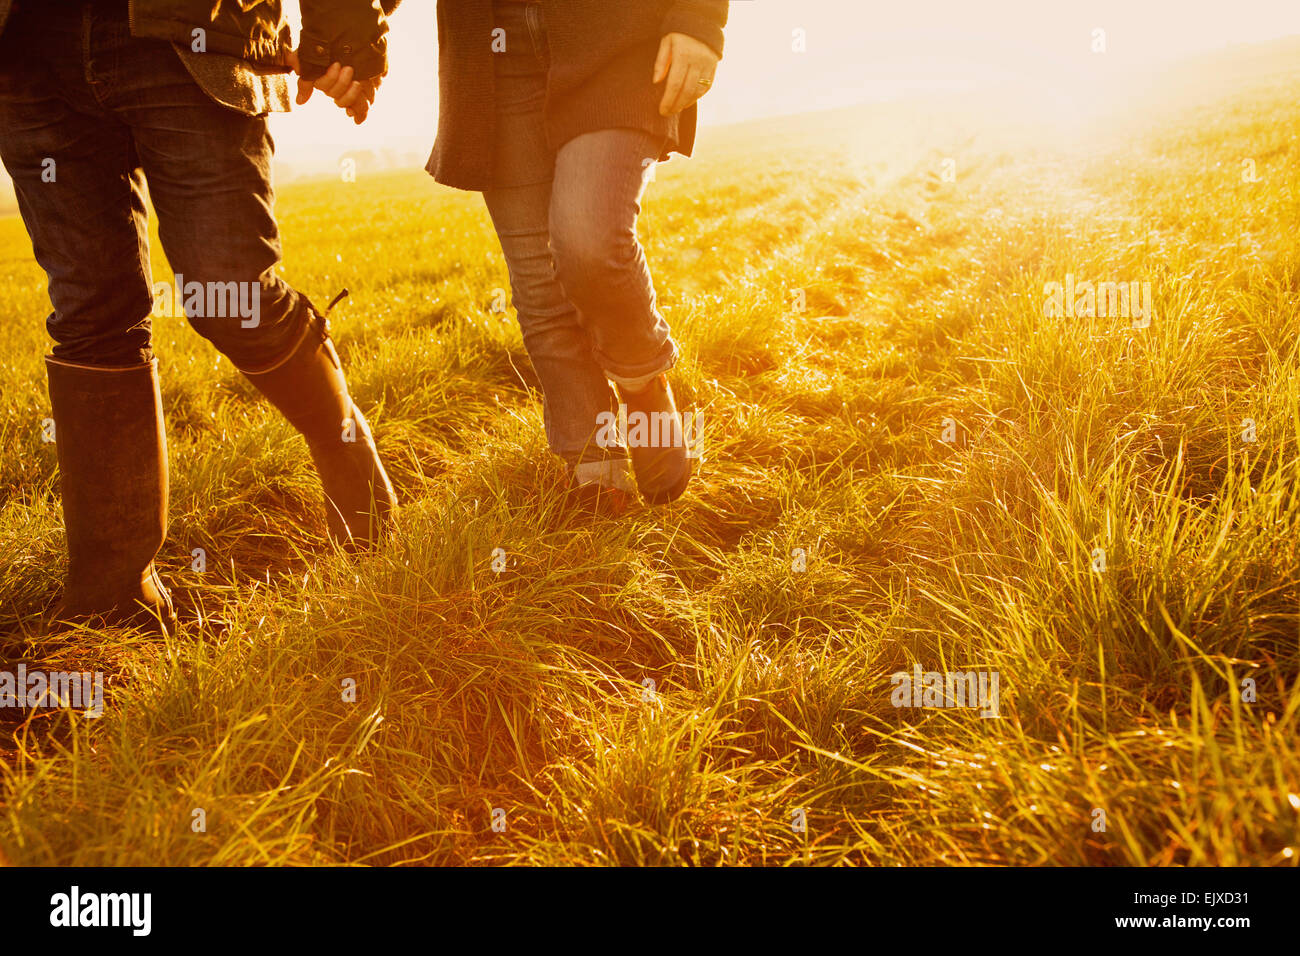 Couple Walking in a Field Holding Hands, Low Section Stock Photo